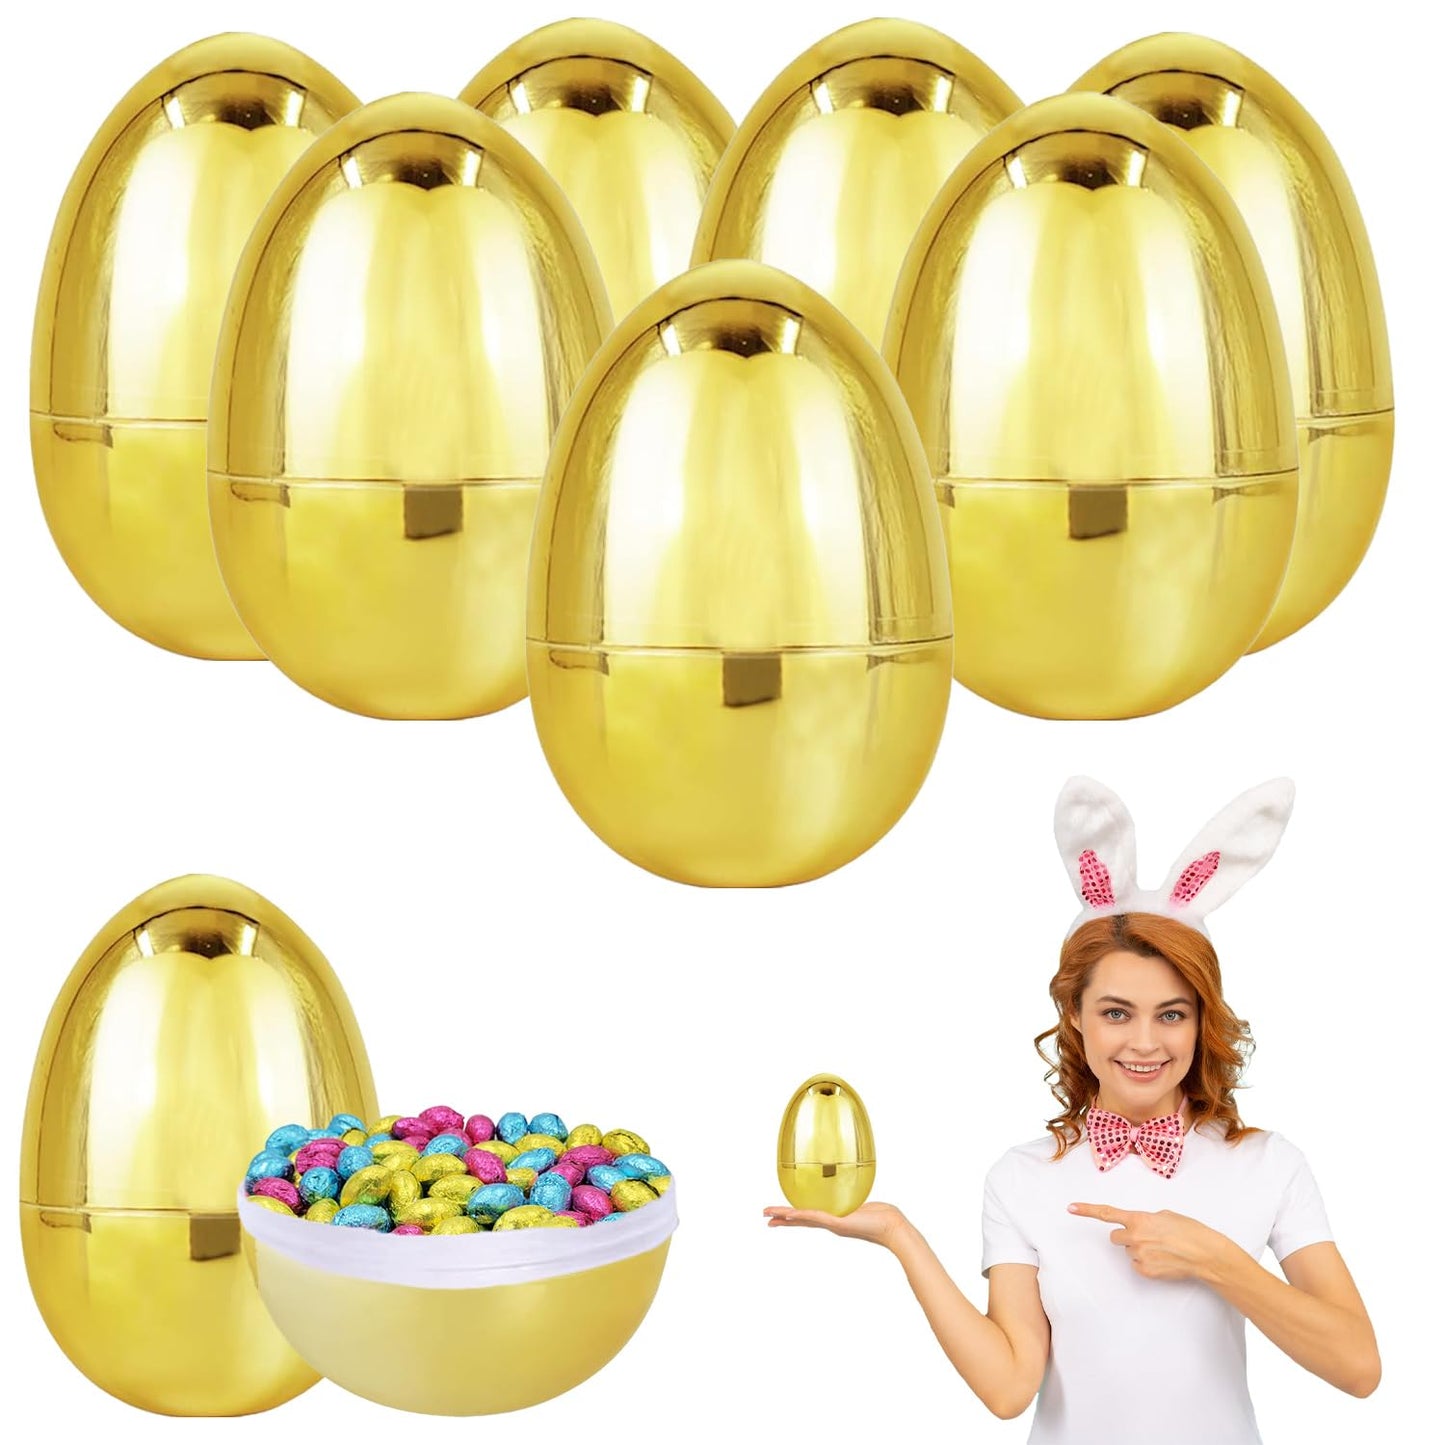 Chochkees Jumbo Golden Easter Eggs Metallic Gold, Goodie Basket Prize, 6" Inch (6-Pack)